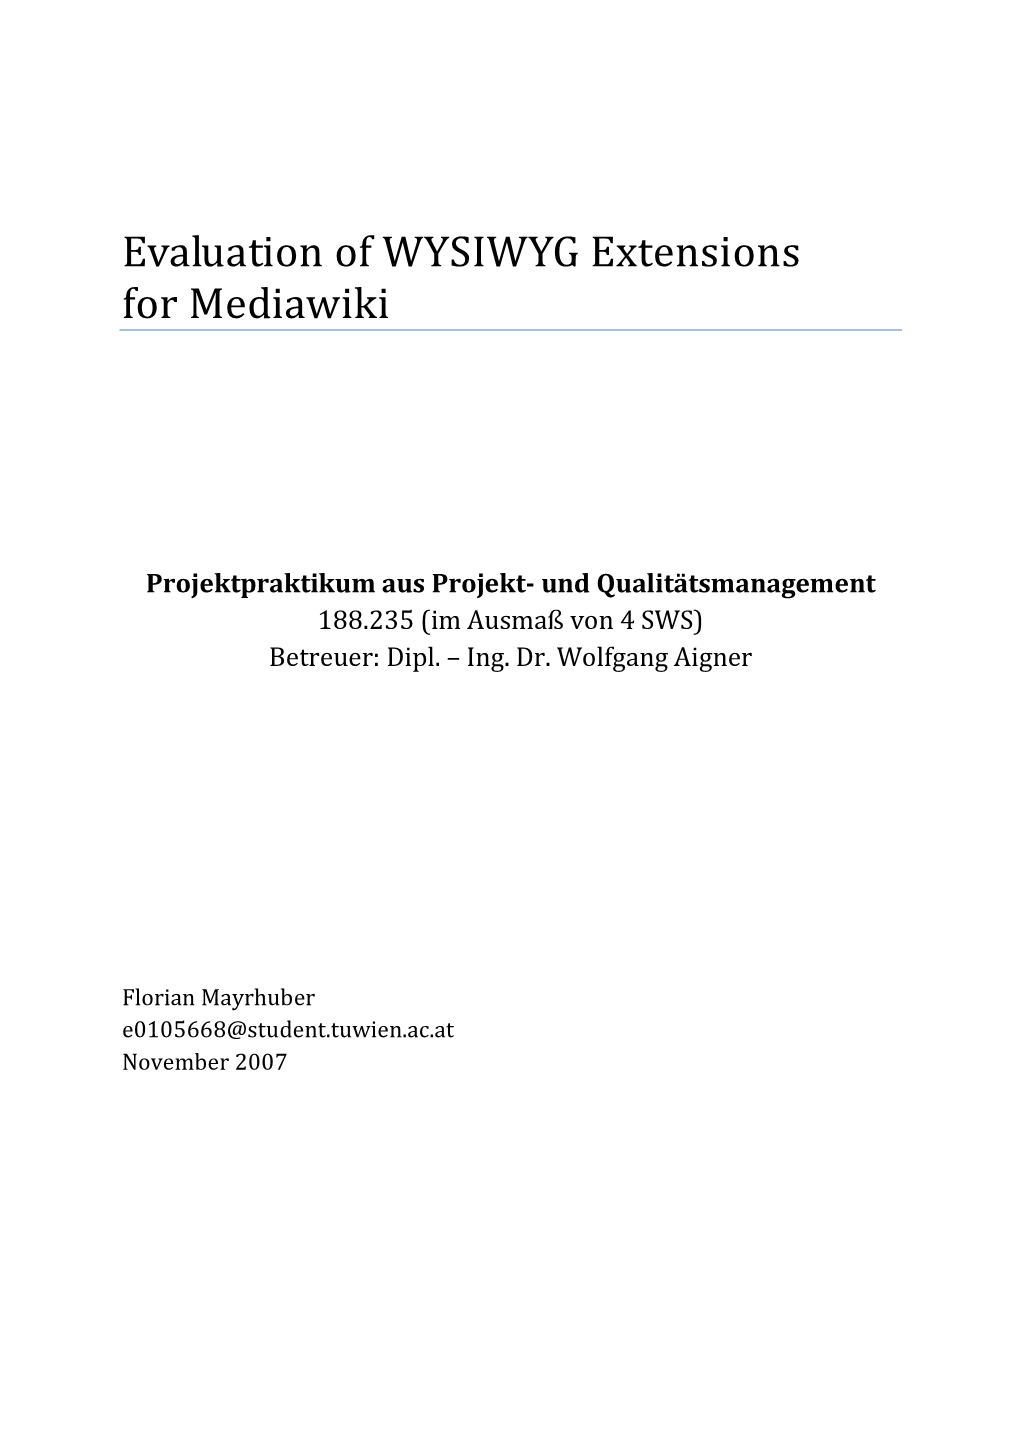 Evaluation of WYSIWYG Extensions for Mediawiki